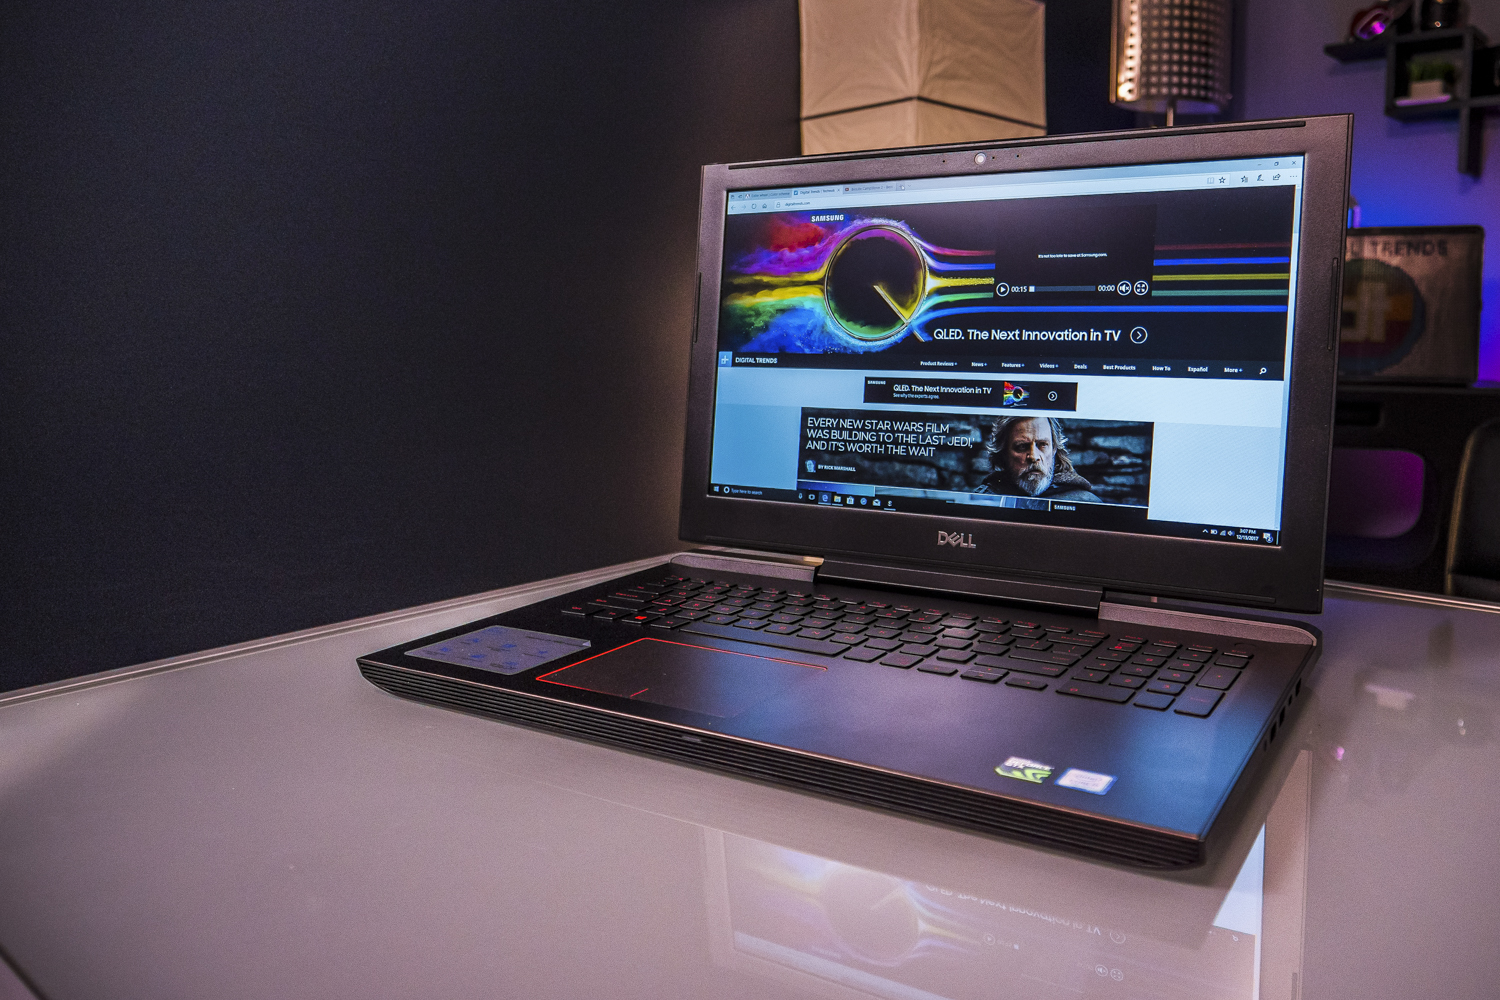 Dell Inspiron 15 7000 Review | Digital Trends